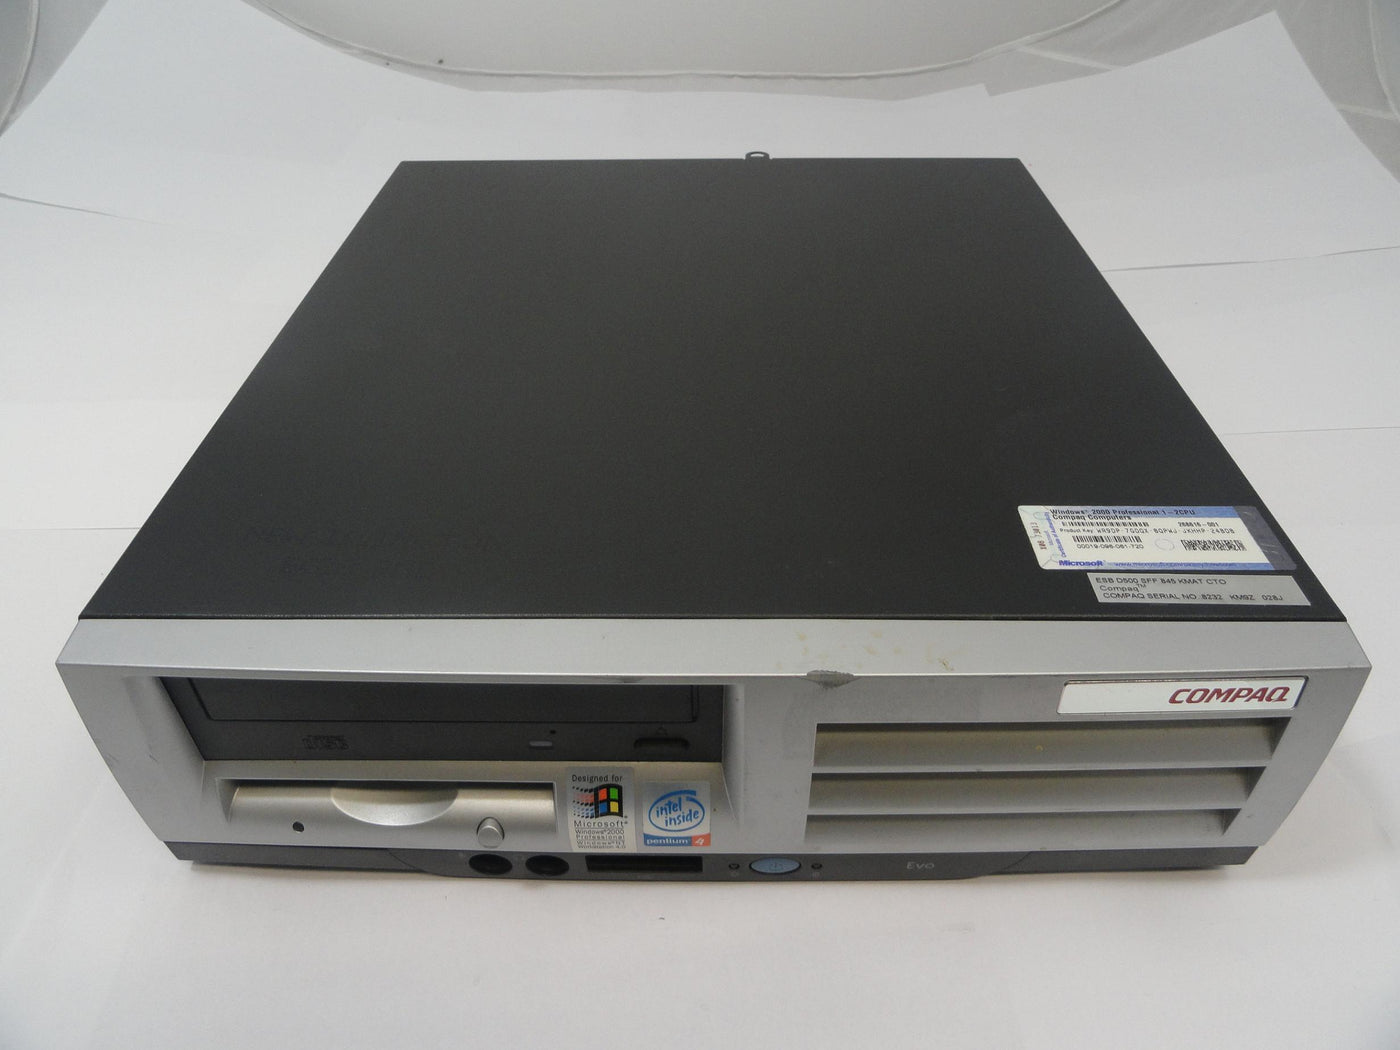 D51S/P1.8/20/P/128C - HP Compaq D510 Small Form Factor Pentium 4 1.8GHz CPU 128Mb On-Board RAM 20Gb XP Pro Installed HDD CD-ROM Drive - USED